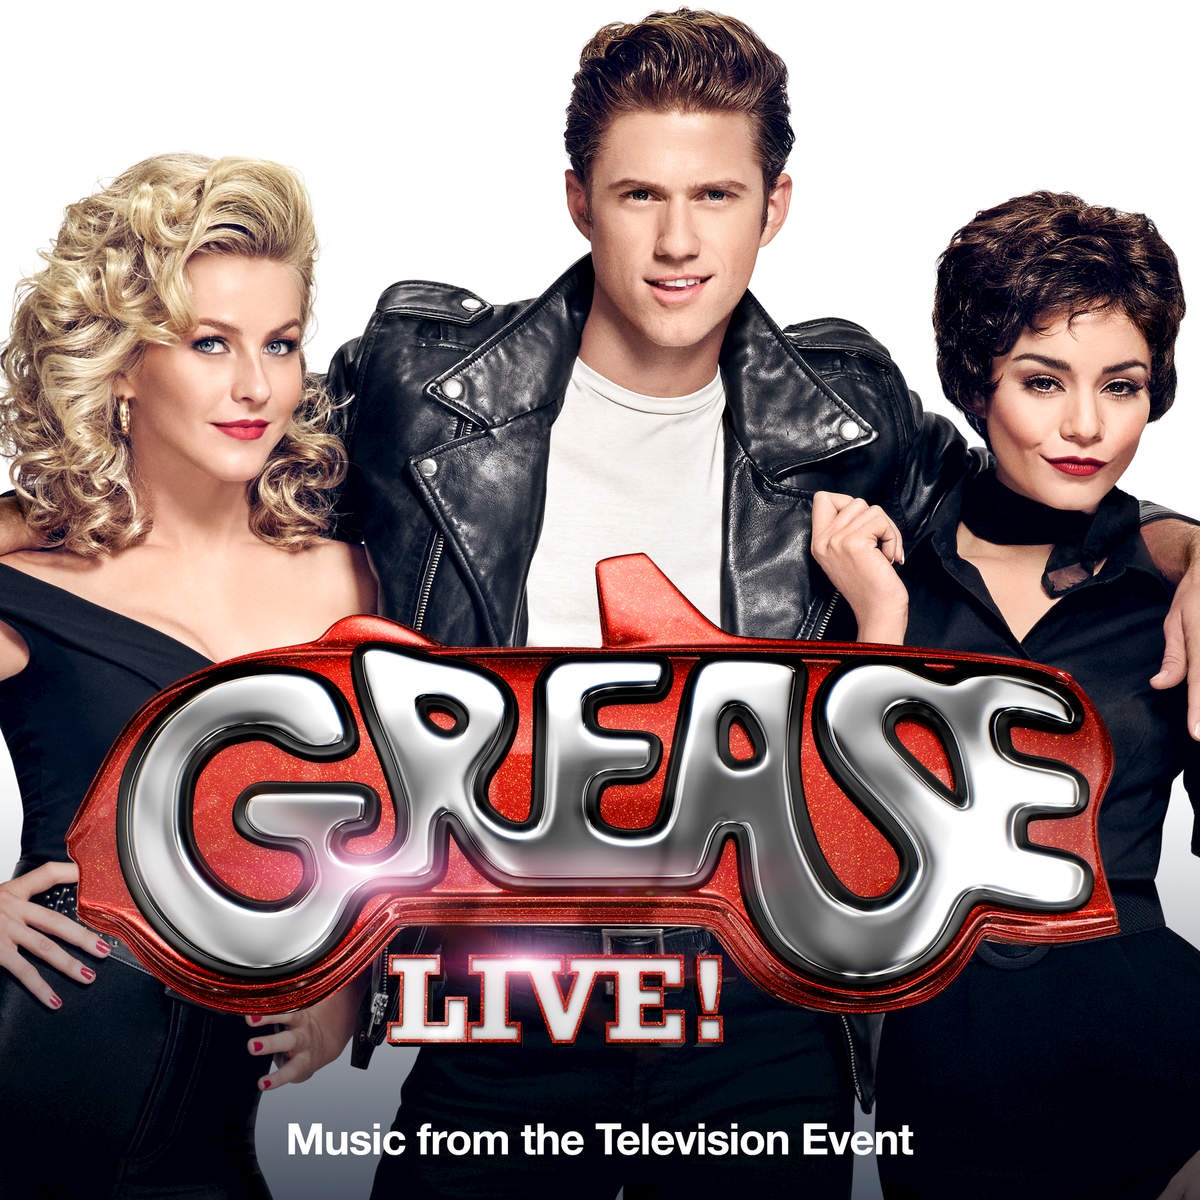 There Are Worse Things I Could Do - From "Grease Live!" Music From The Television Event